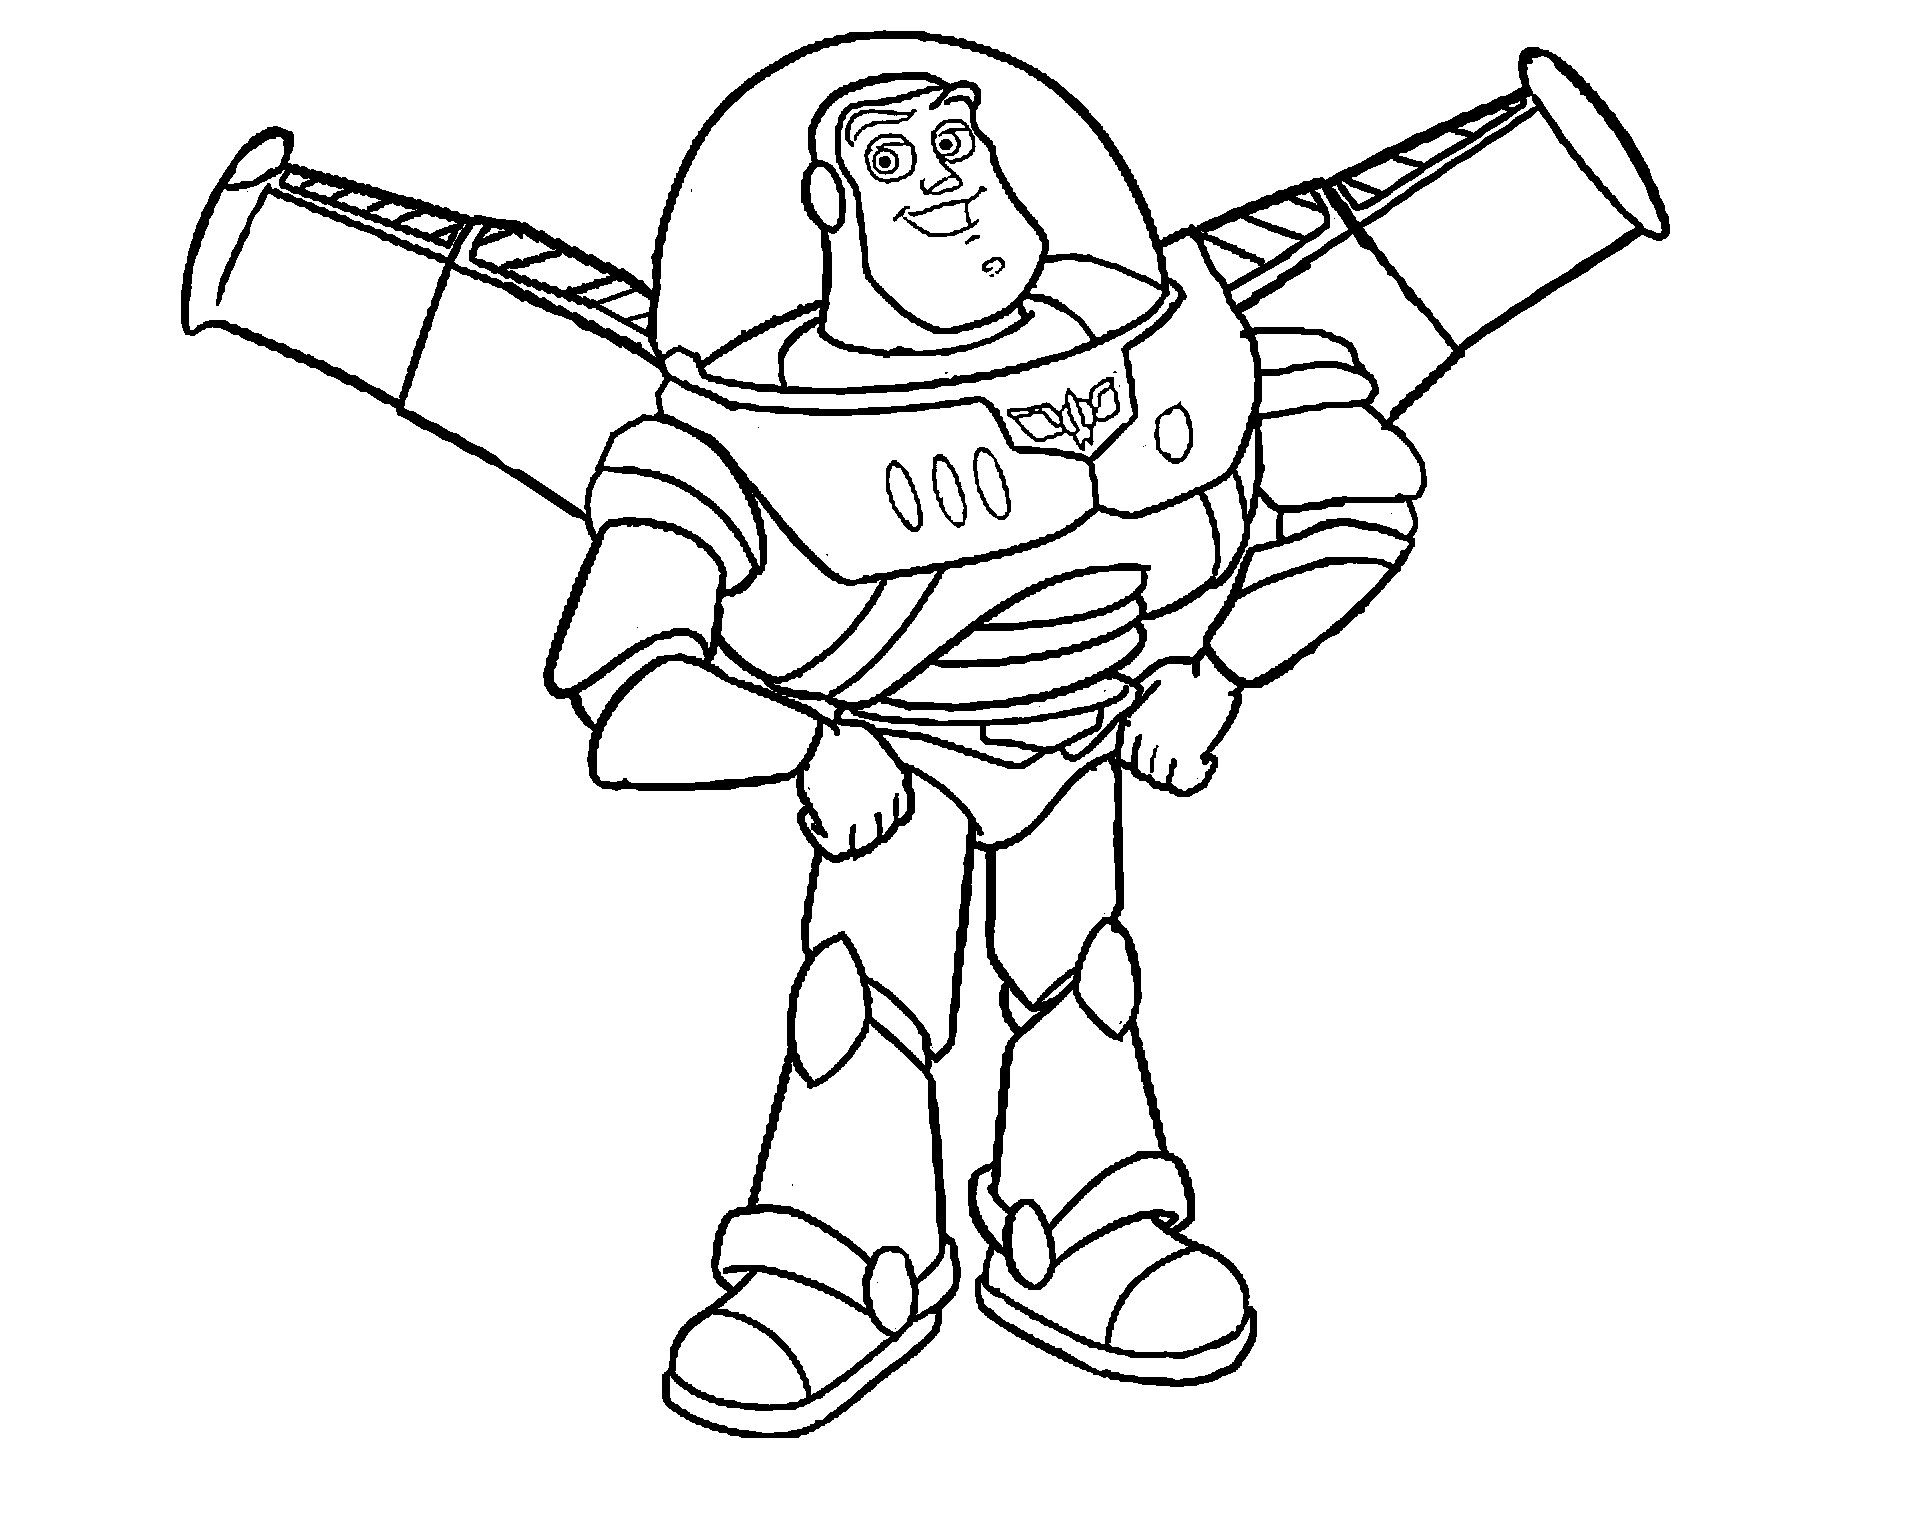 Toy Story Image Coloring Page